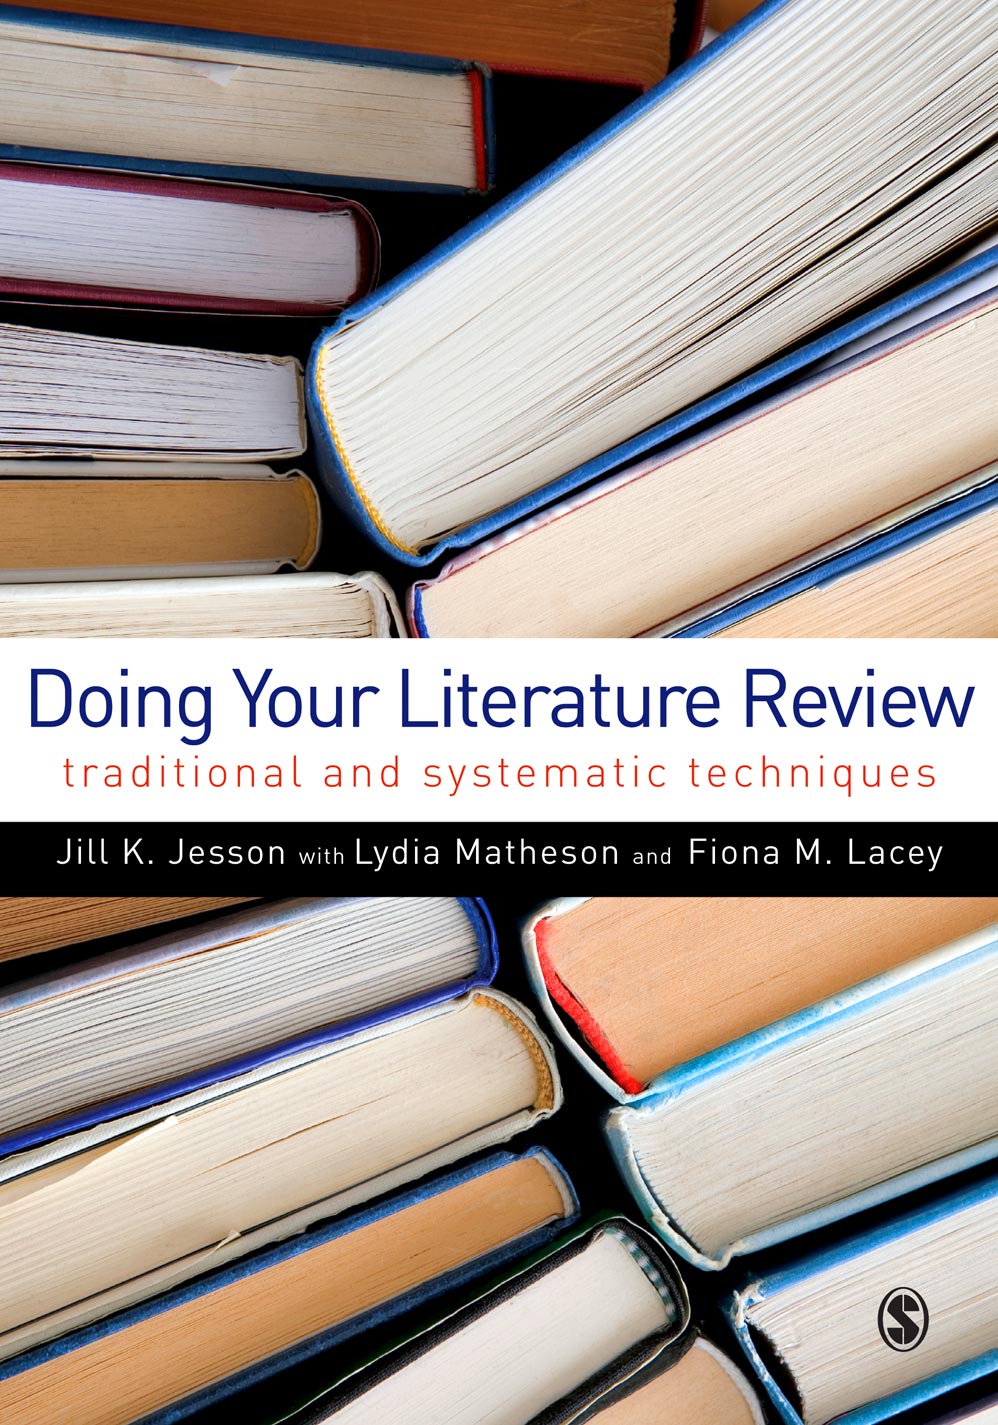 Doing Your Literature Review - Jill Jesson, Lydia Matheson, Fiona M Lacey